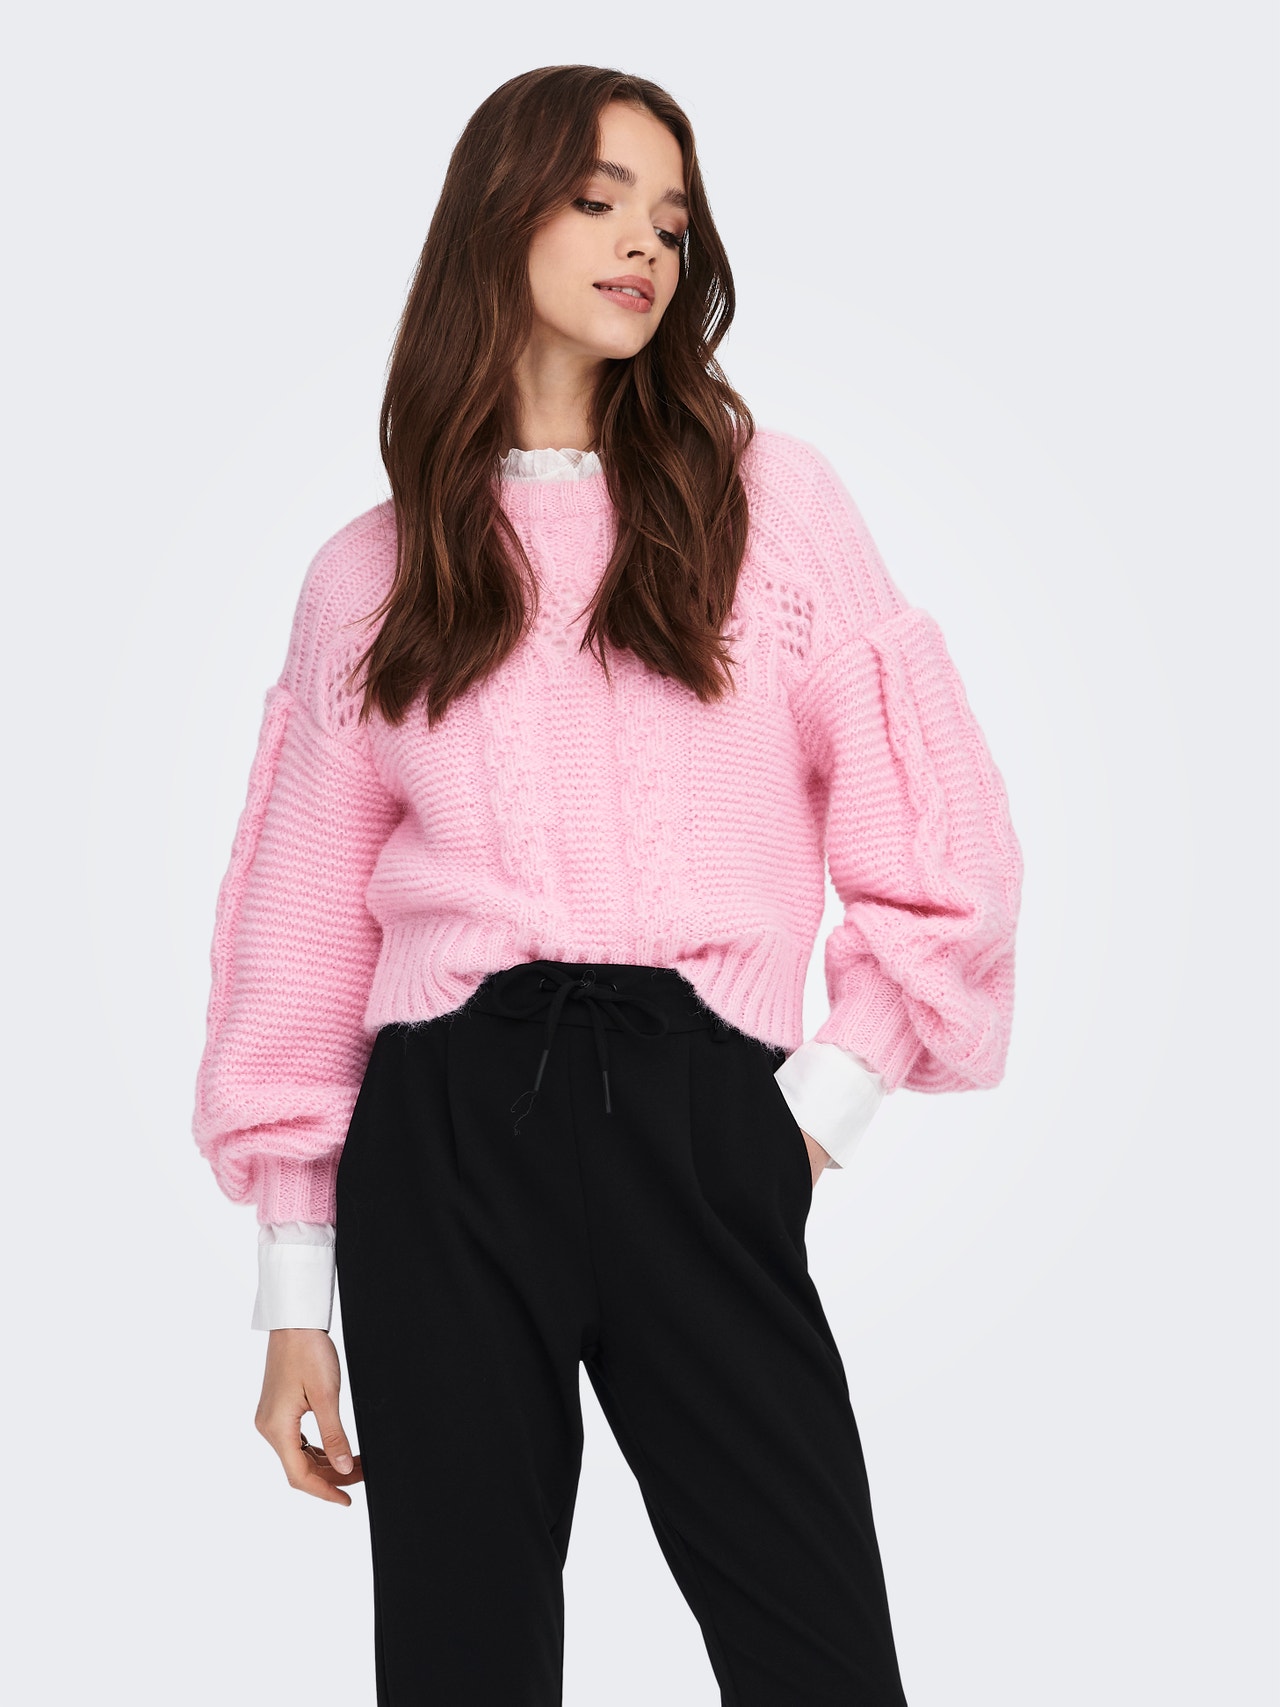 ONLY O-neck knitted pullover -Sweet Lilac - 15267968